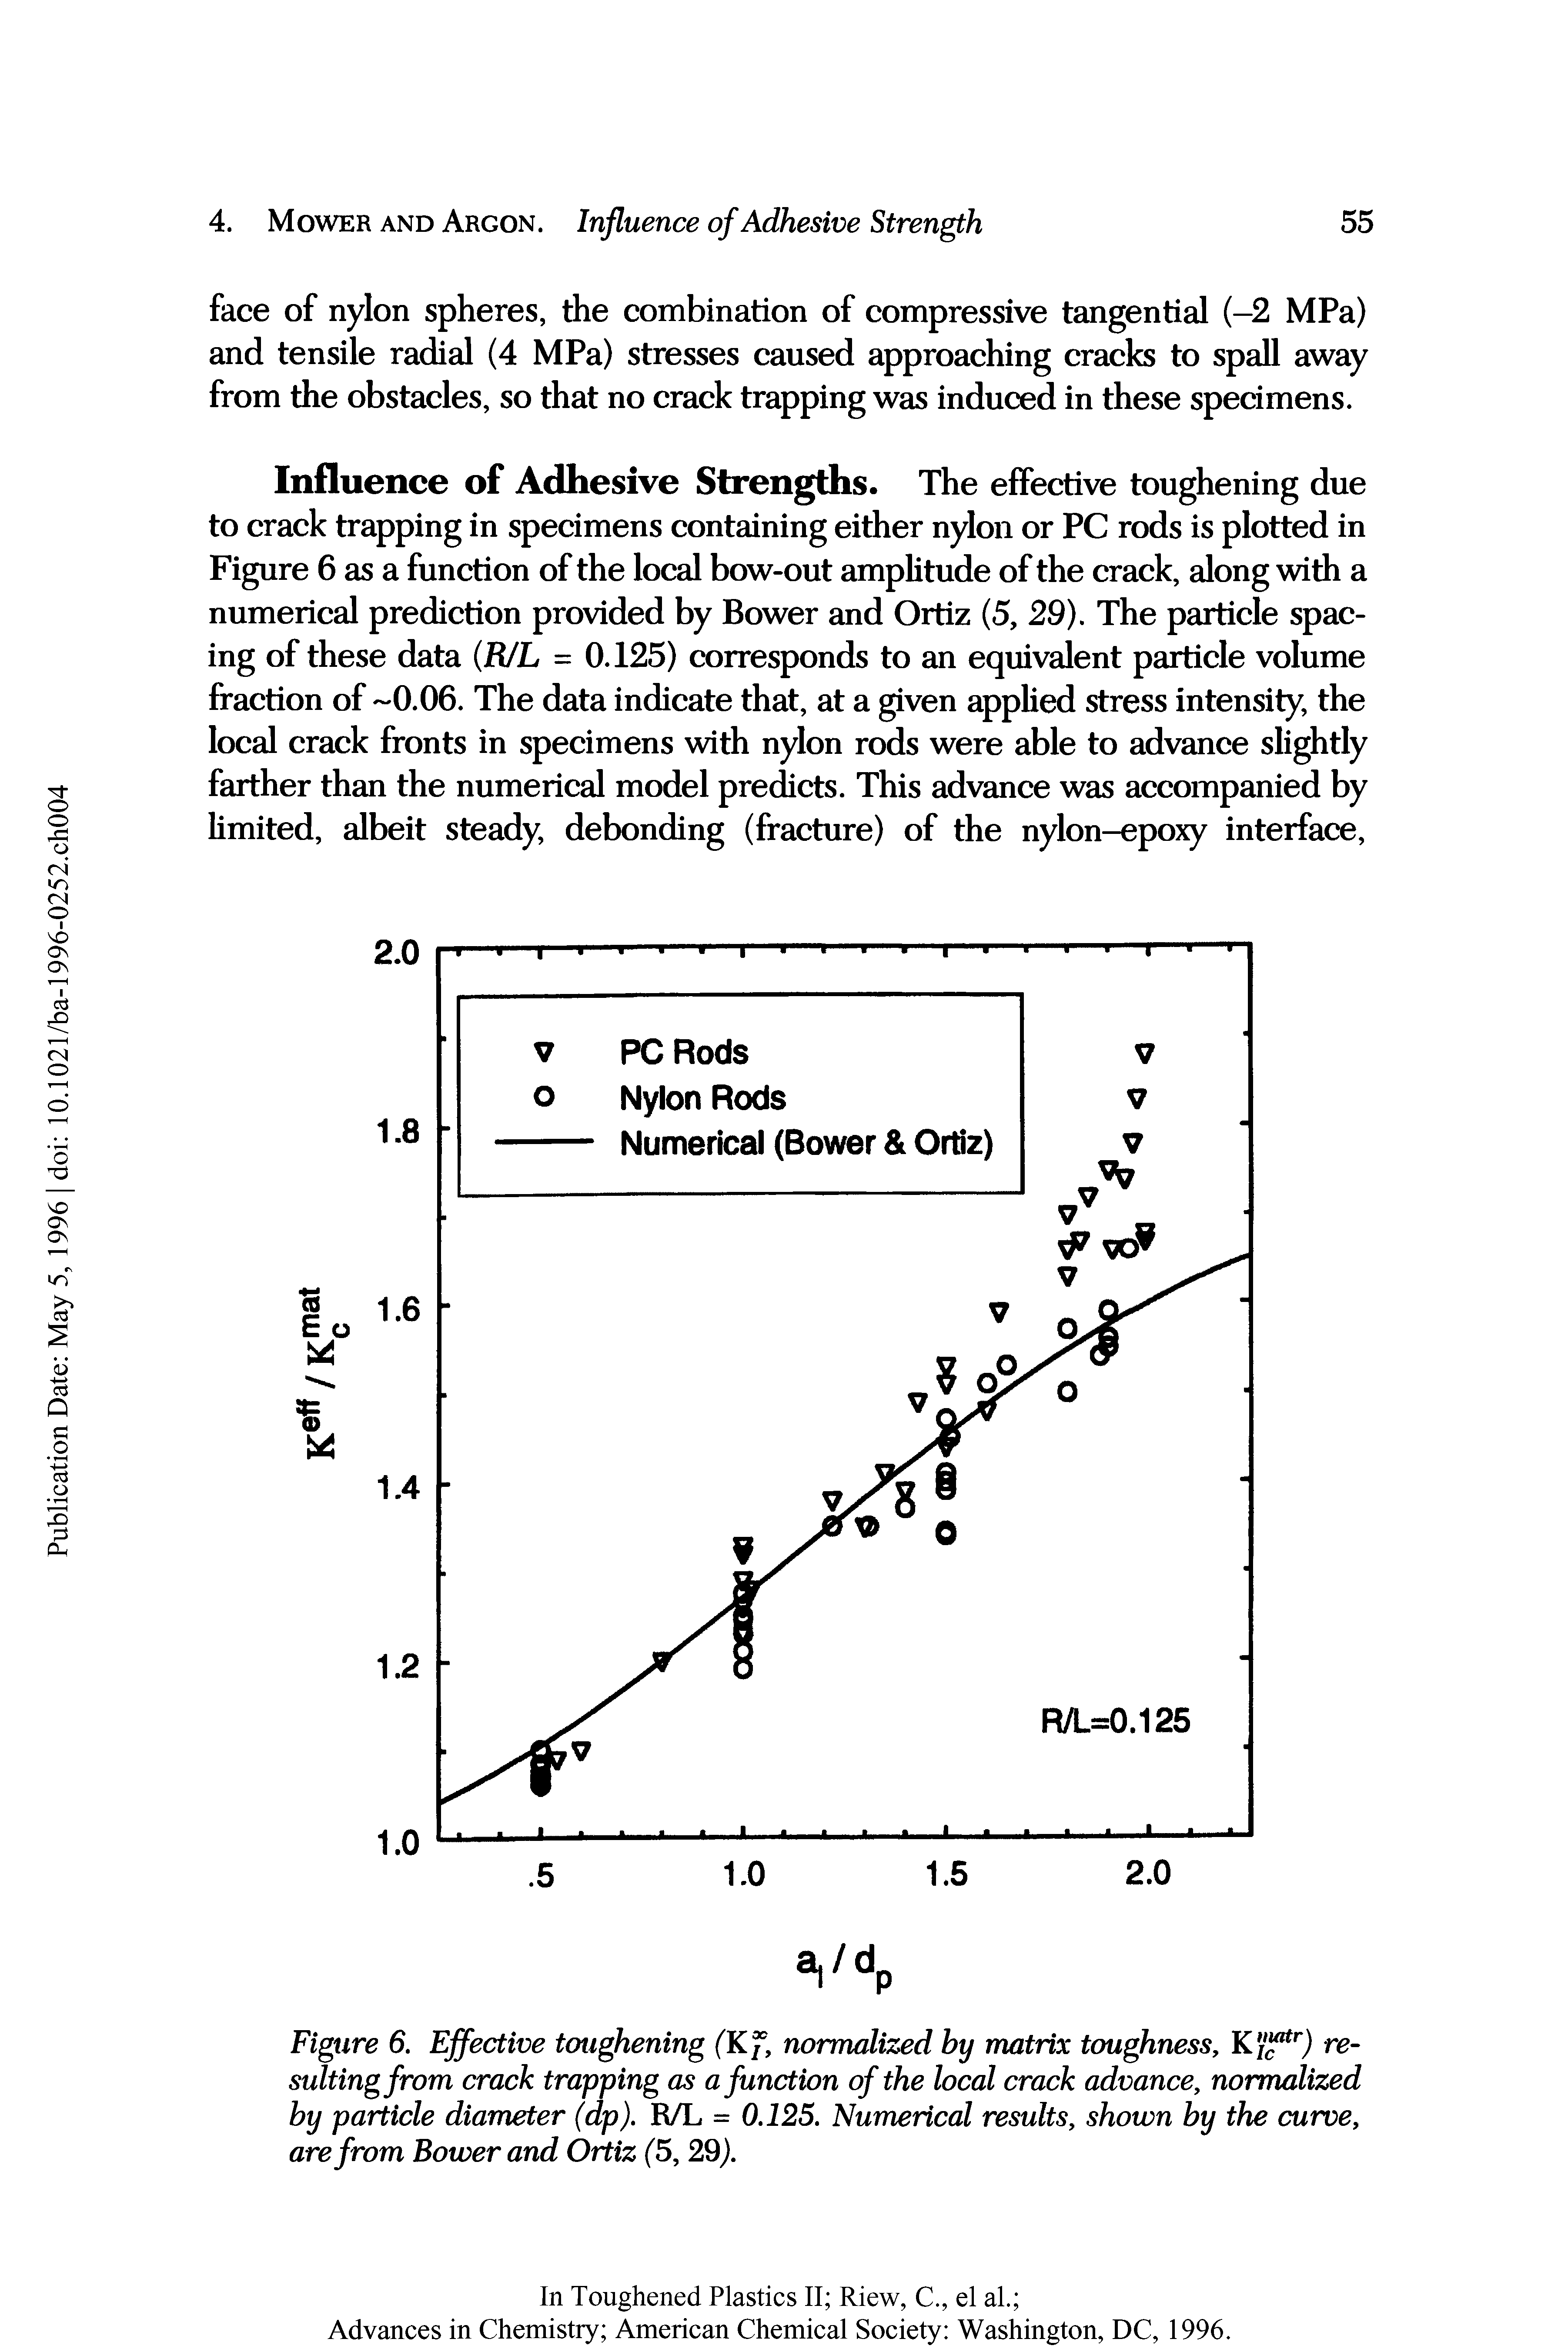 Figure 6. Effective toughening (Kf, normalized hy matrix toughness, K r) resulting from crack trapping as a function of the local crack advance, normalized hy particle diameter (dp). R/L = 0.125. Numerical results, shown by the curve, are from Bower and Ortiz (5, 29).